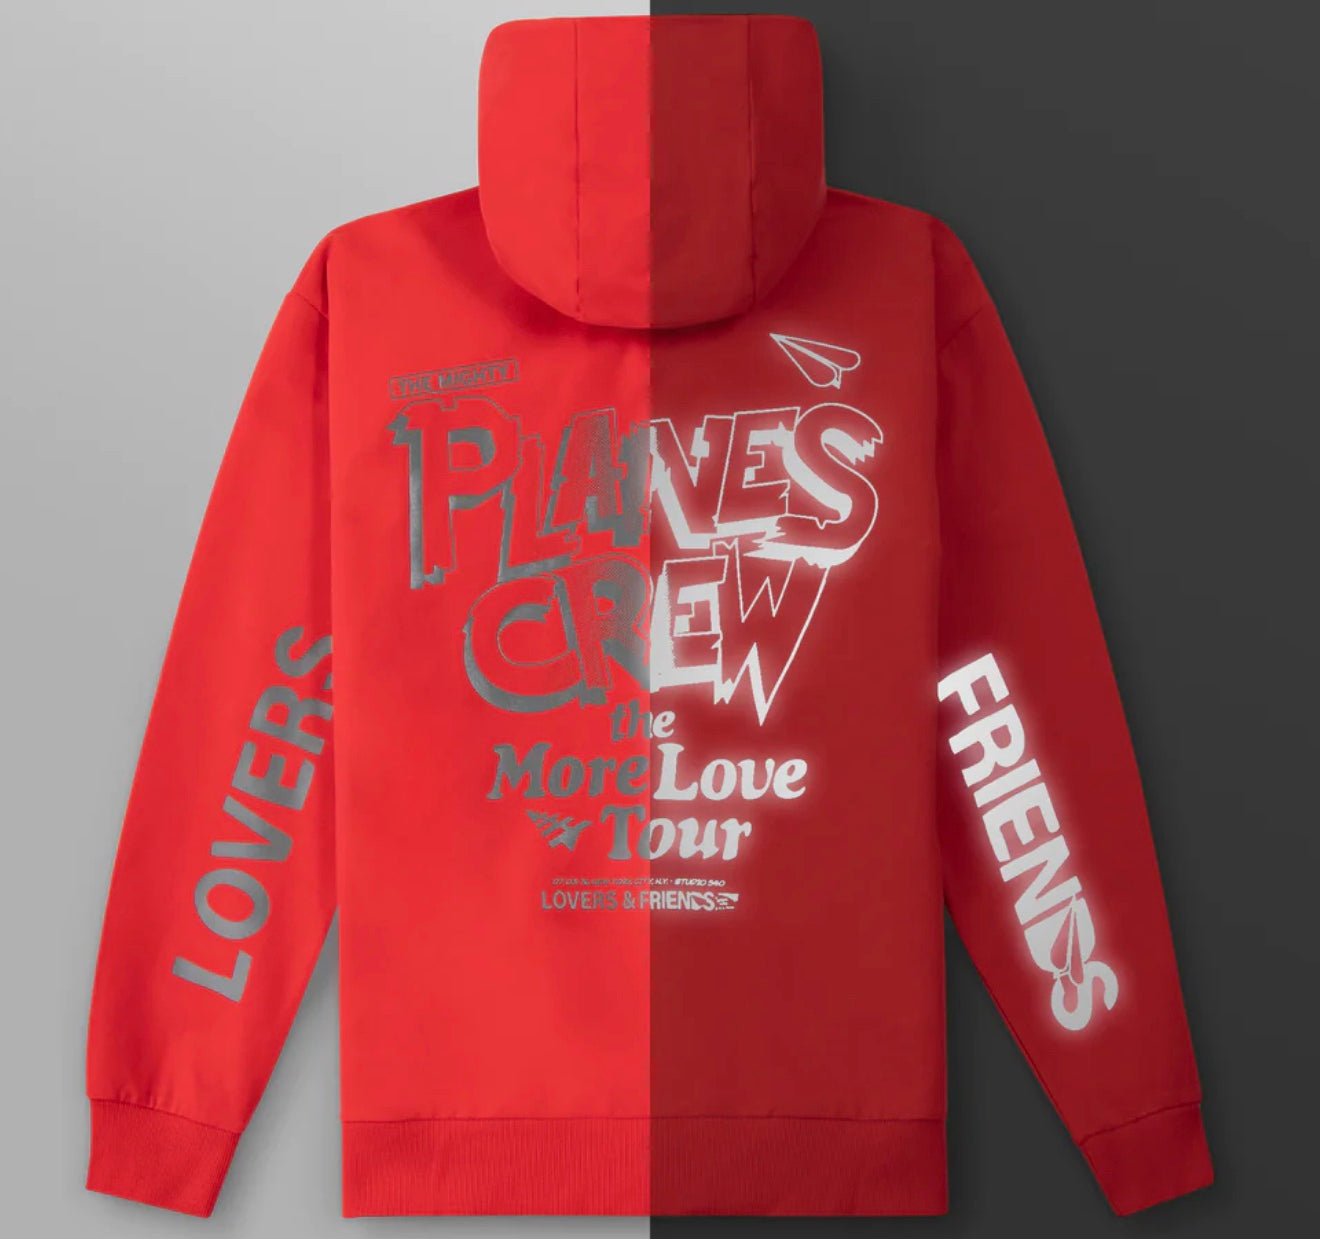 Paper planes more love tour hoodie